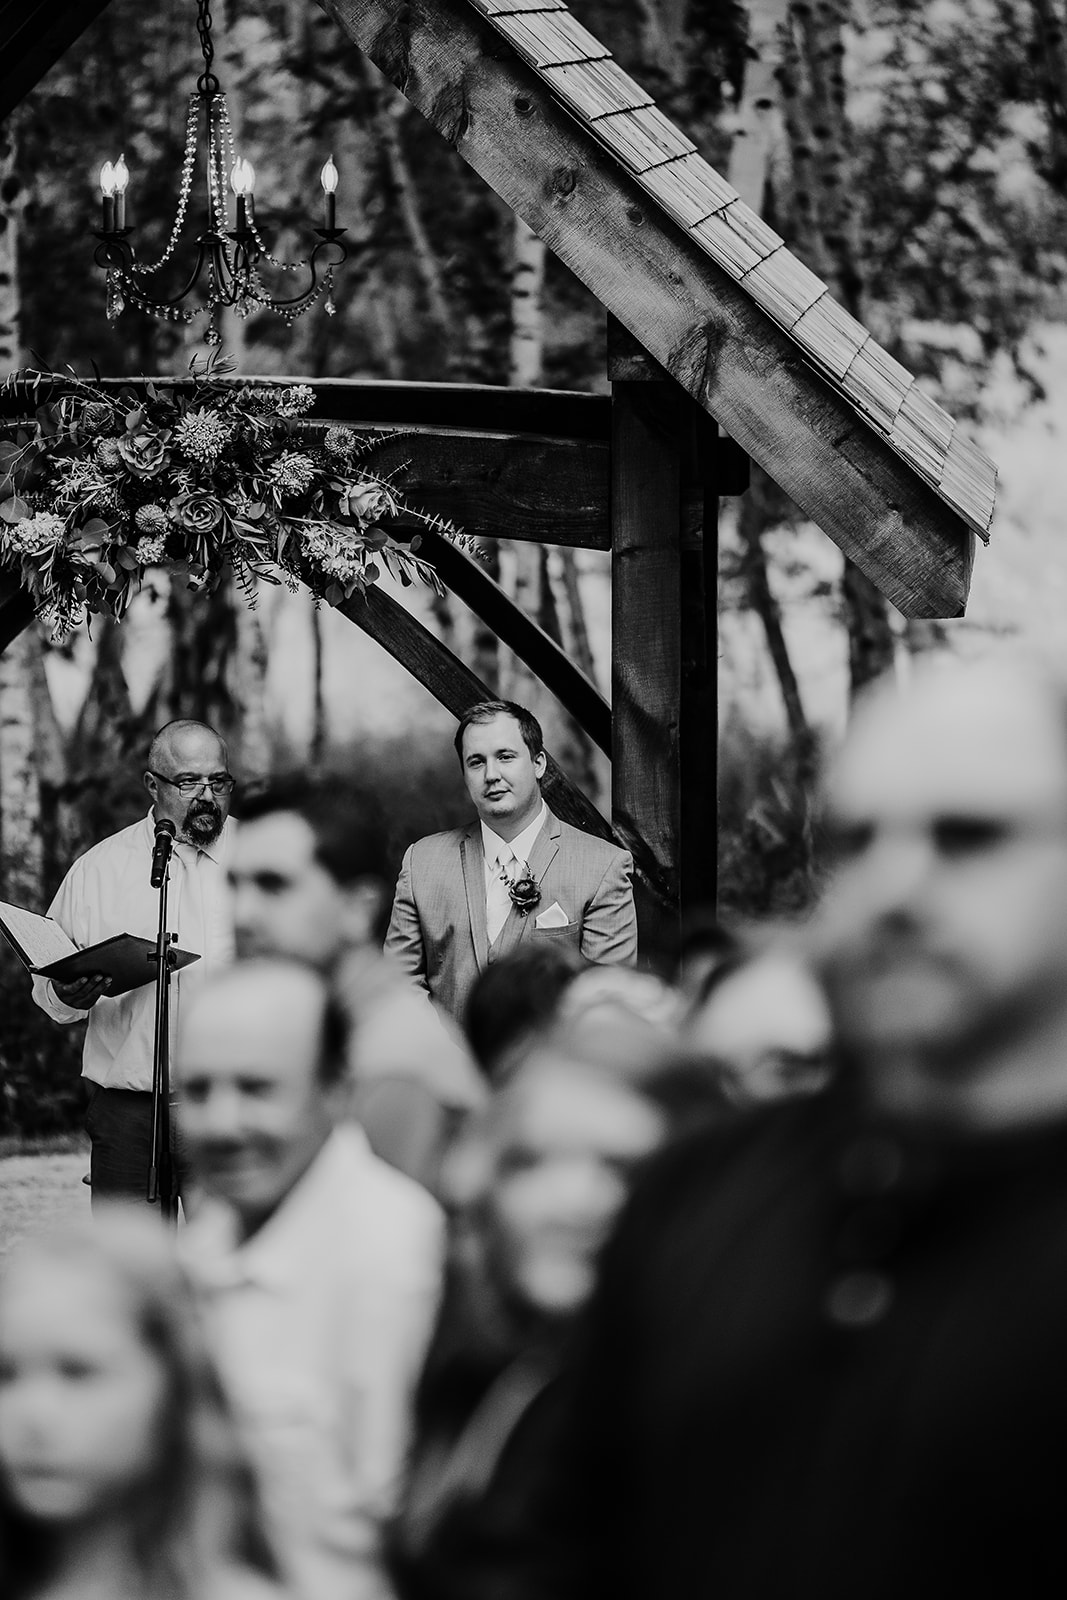 A Wisconsin groom sees his bride walking down the aisle. Chippewa valley wedding Apple orchard wedding Black and white wedding photos First look photos #dixonappleorchard #orchardweddingvenue #outdoorwedding #appleorchardwedding #wisconsinweddingvenue
